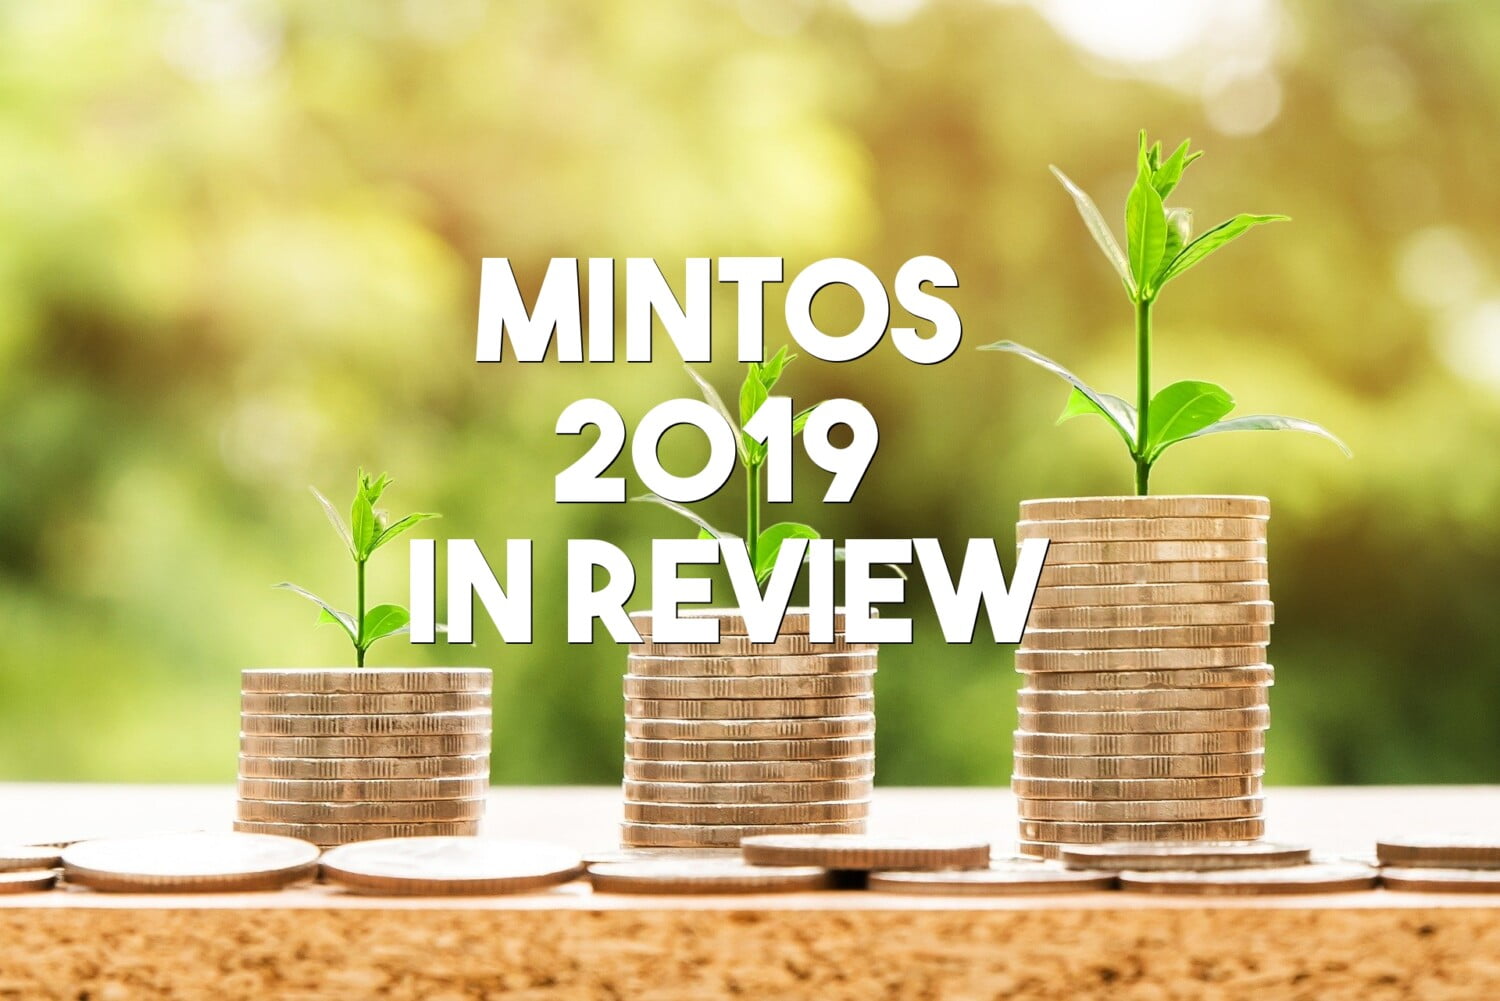 mintos 2019 in review